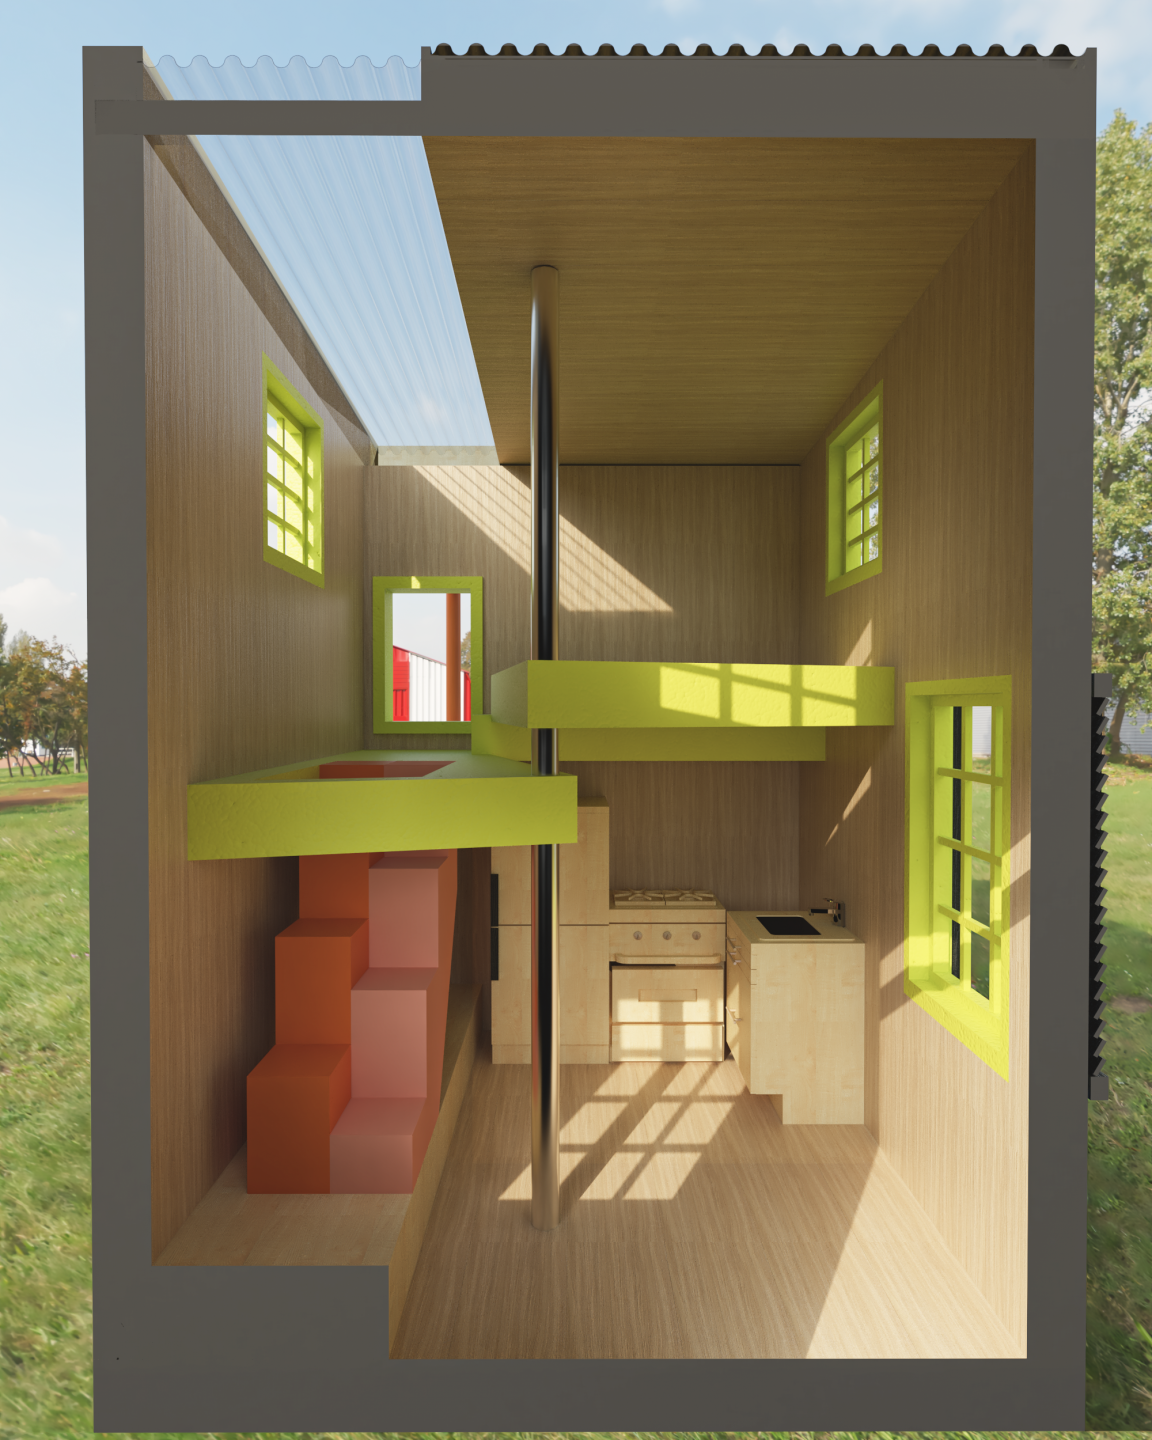 interior rendering of a children's playhouse